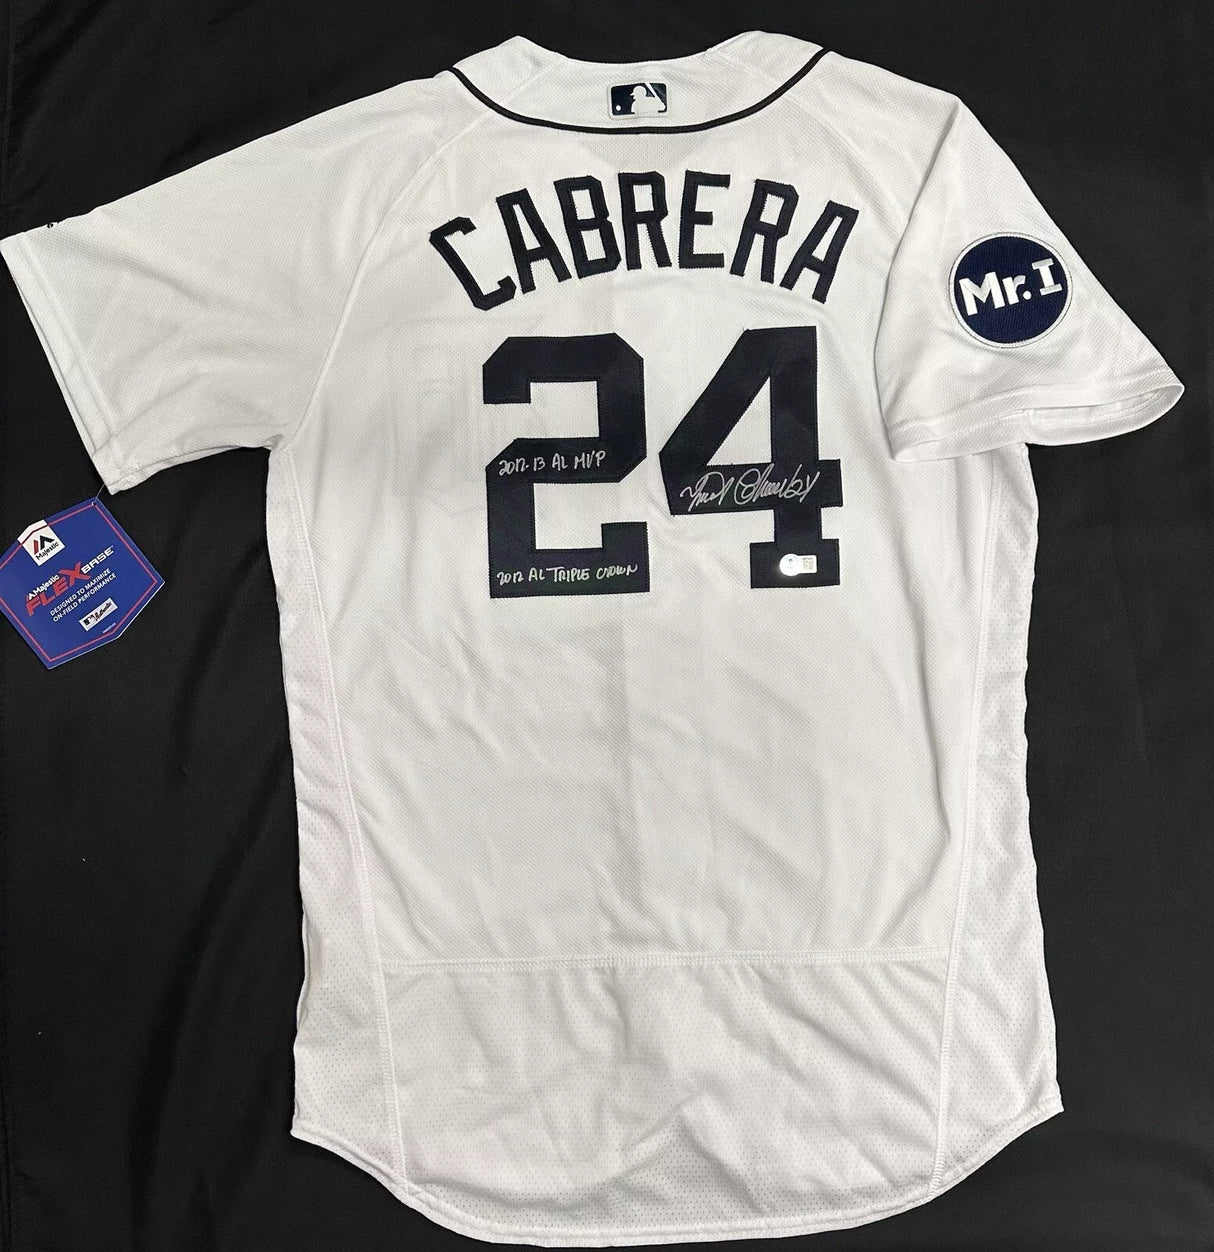 Miguel Cabrera 2012 Triple Crown MVP Signed Authentic Detroit Tigers Jersey BAS